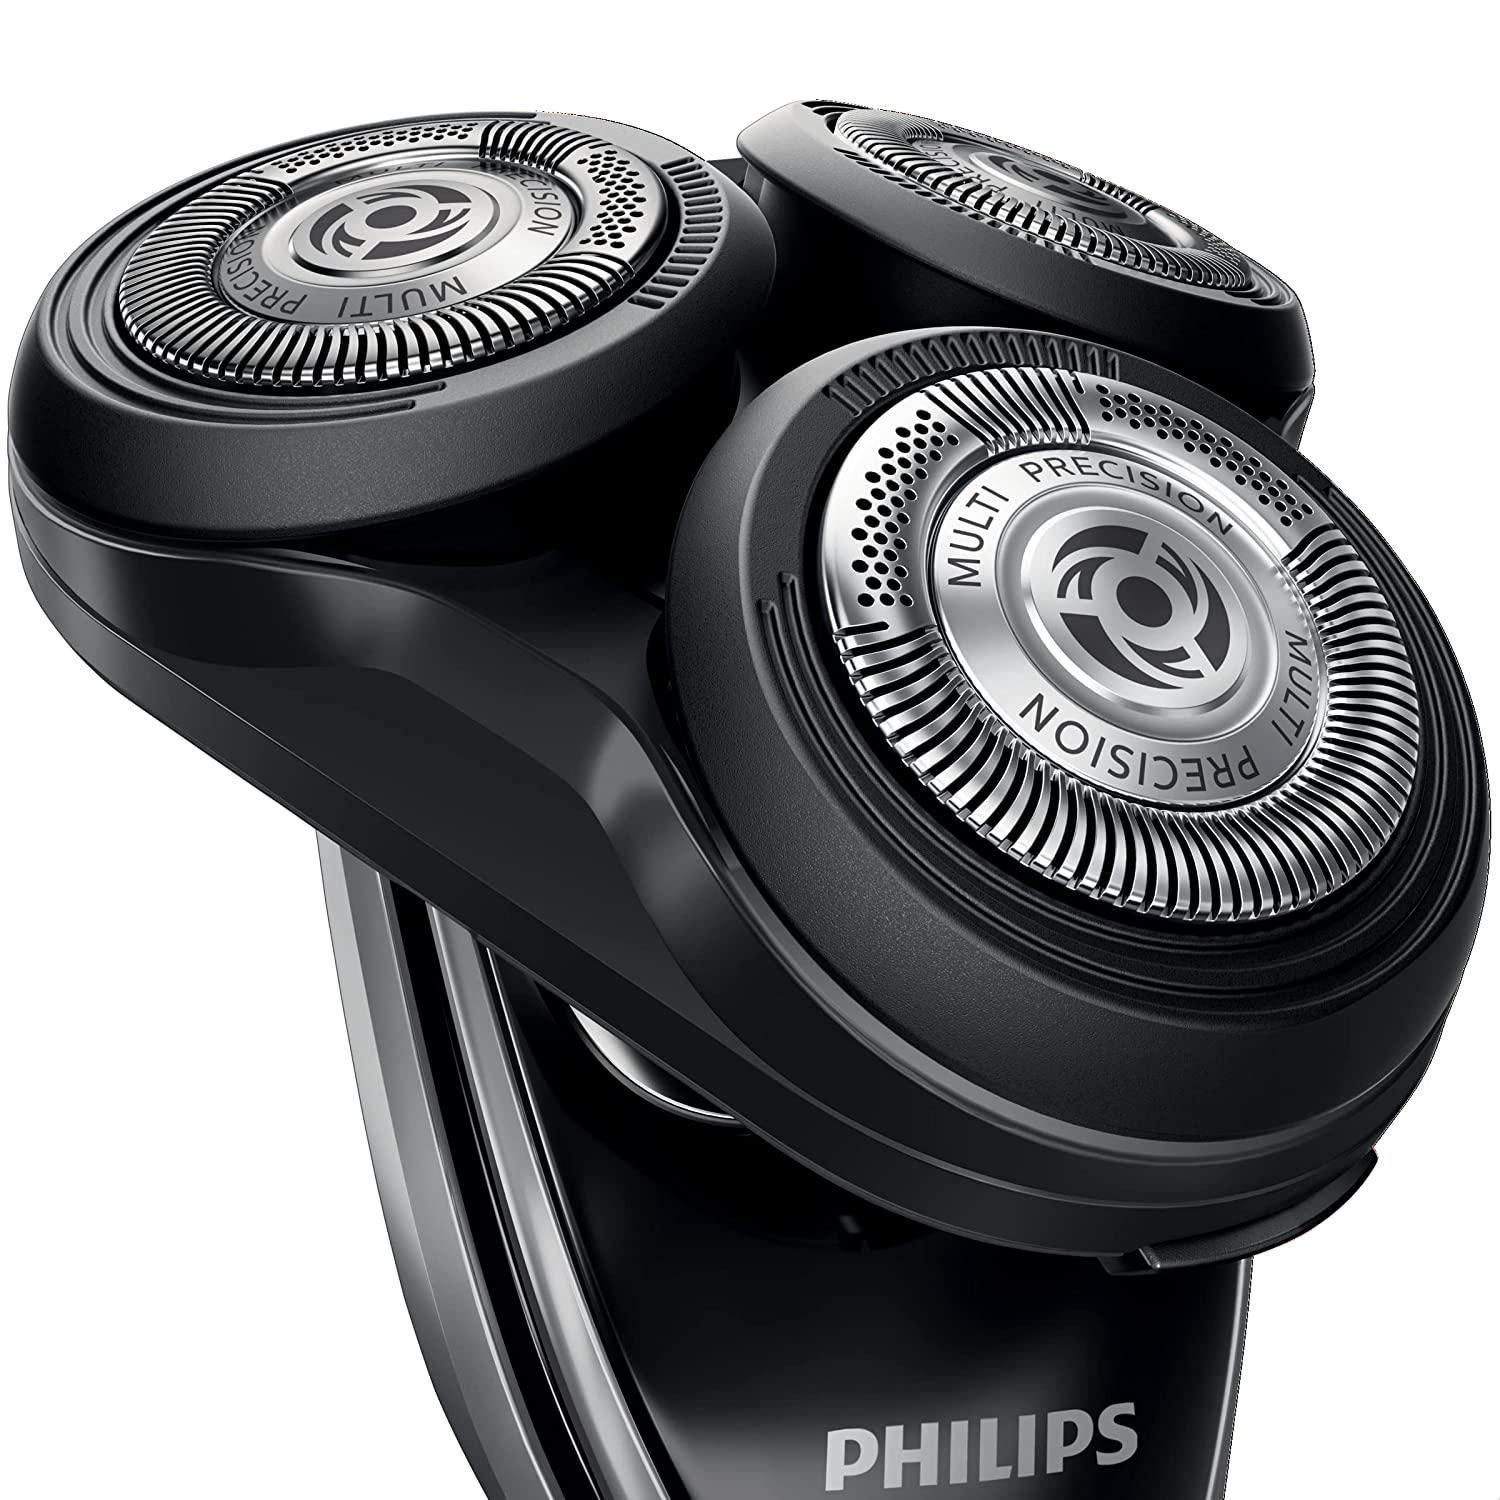 Philips Norelco Replacement Heads For Series 5000 Shavers Sh5052